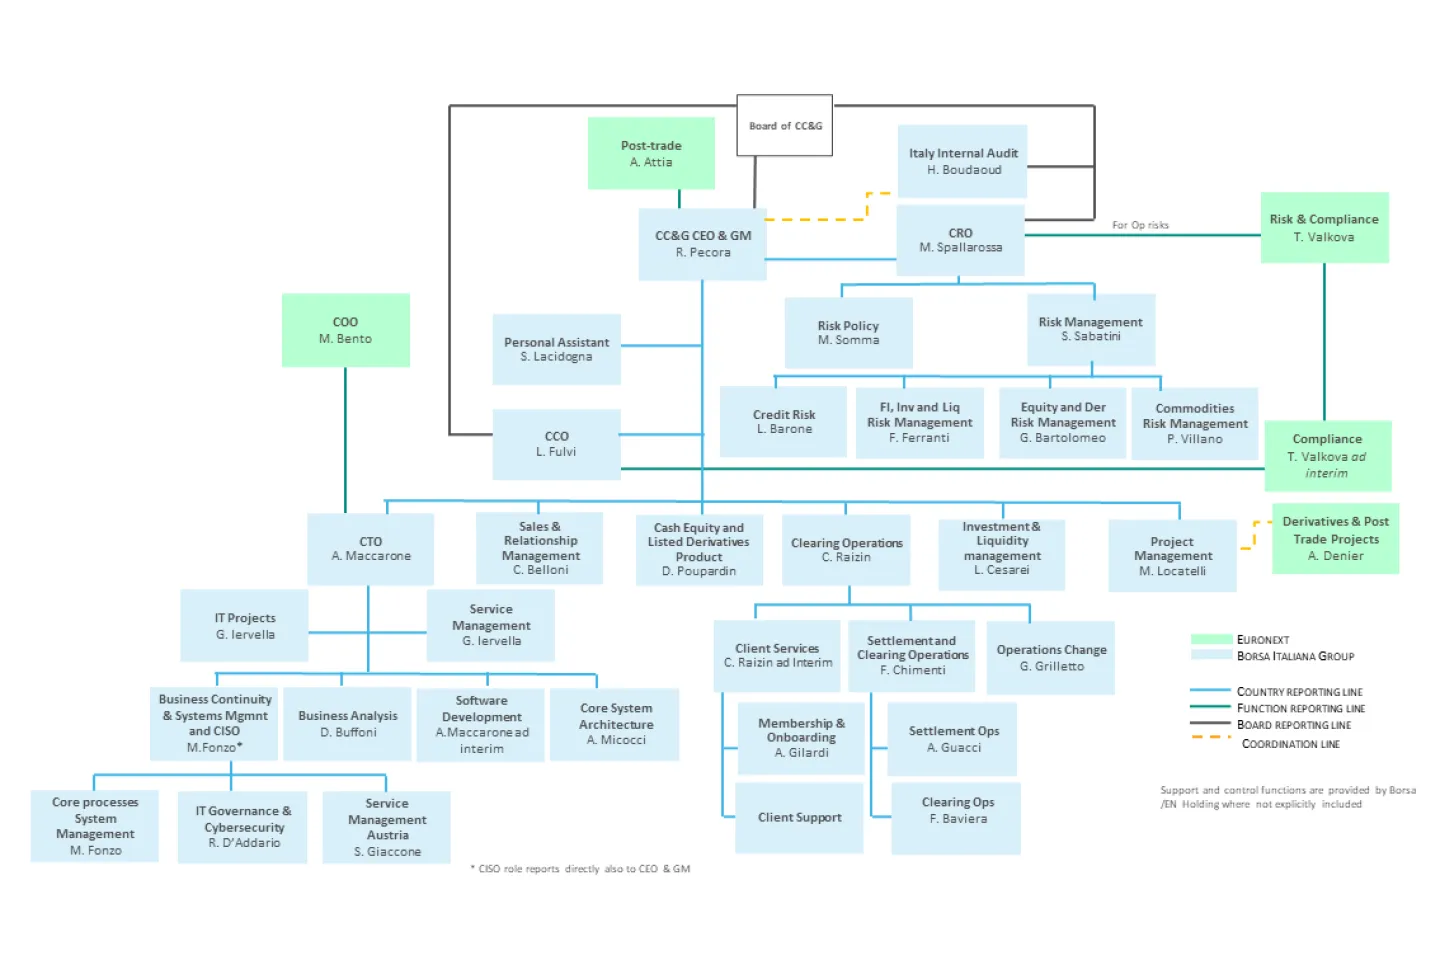 Euronext Clearing org chart